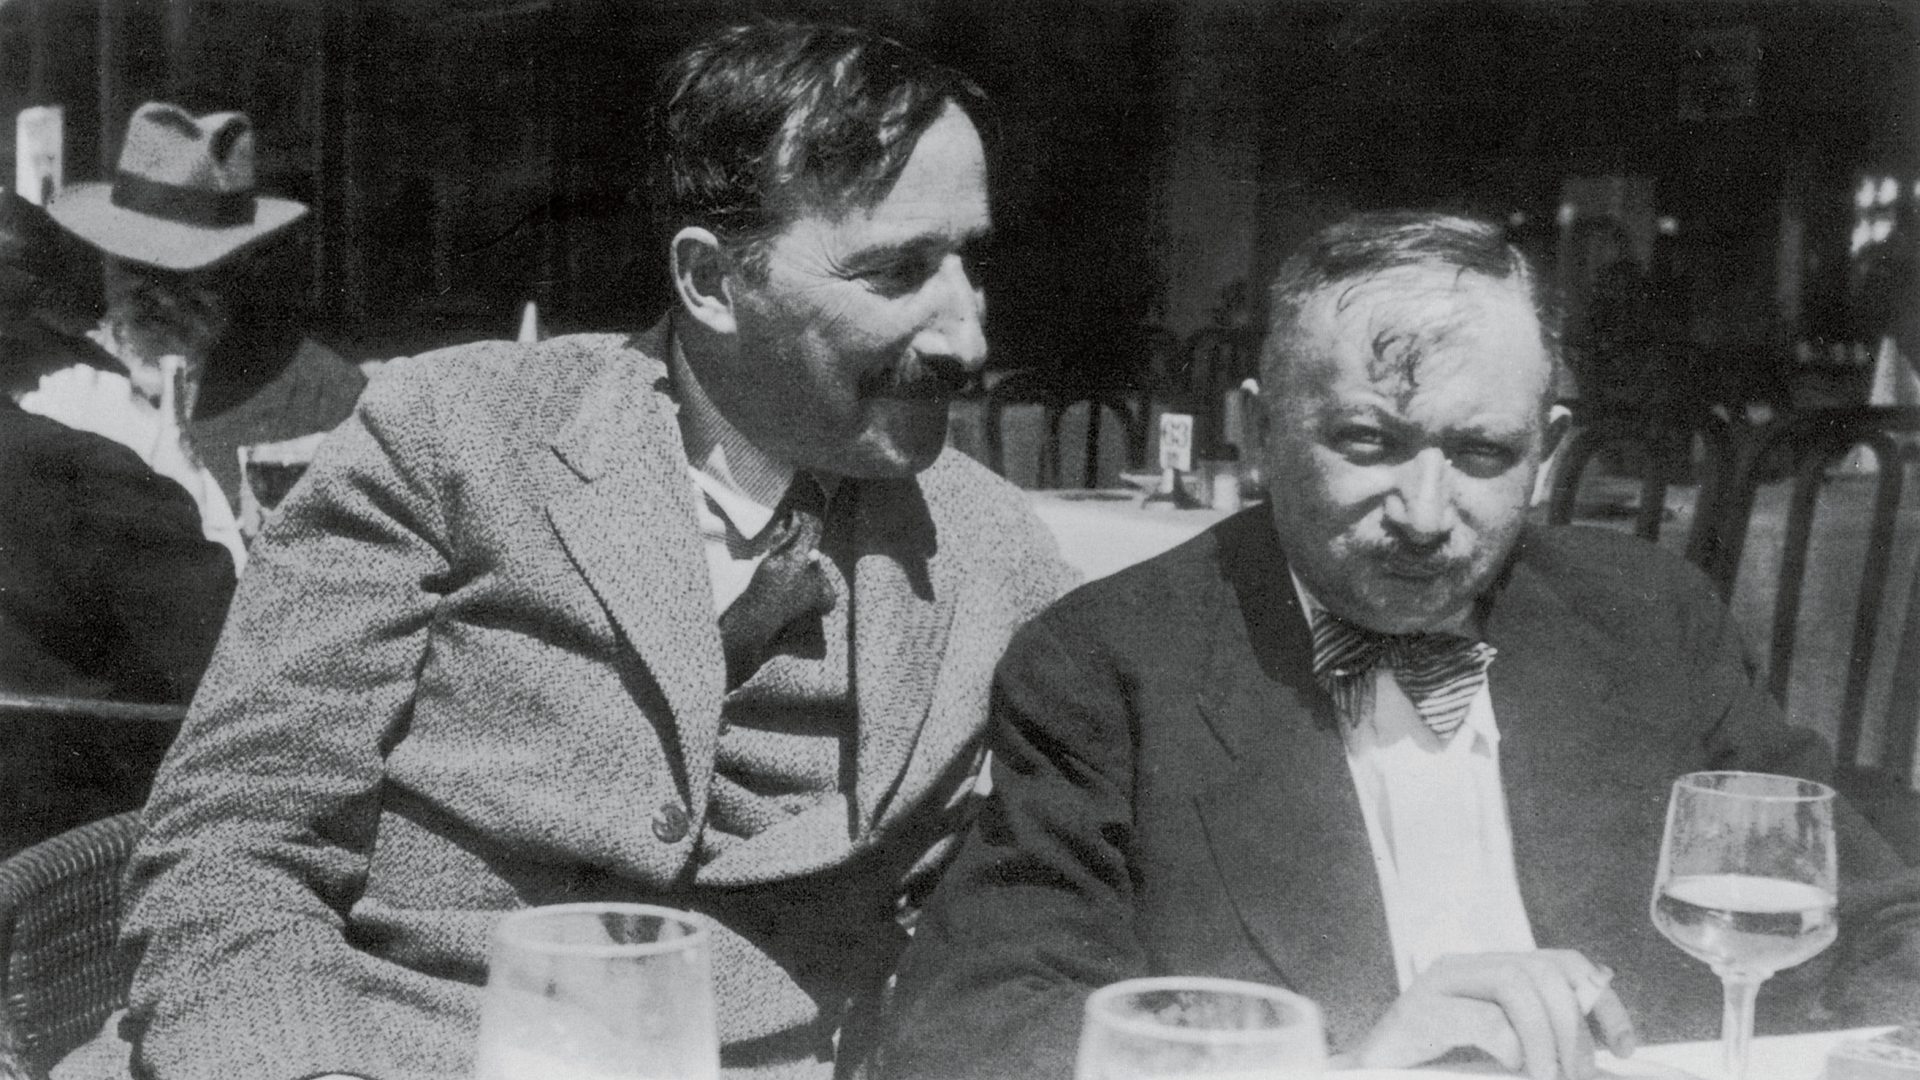 Stefan Zweig and Josef Roth in Ostende, Belgium in 1936. Photo: Imagno/Getty Images